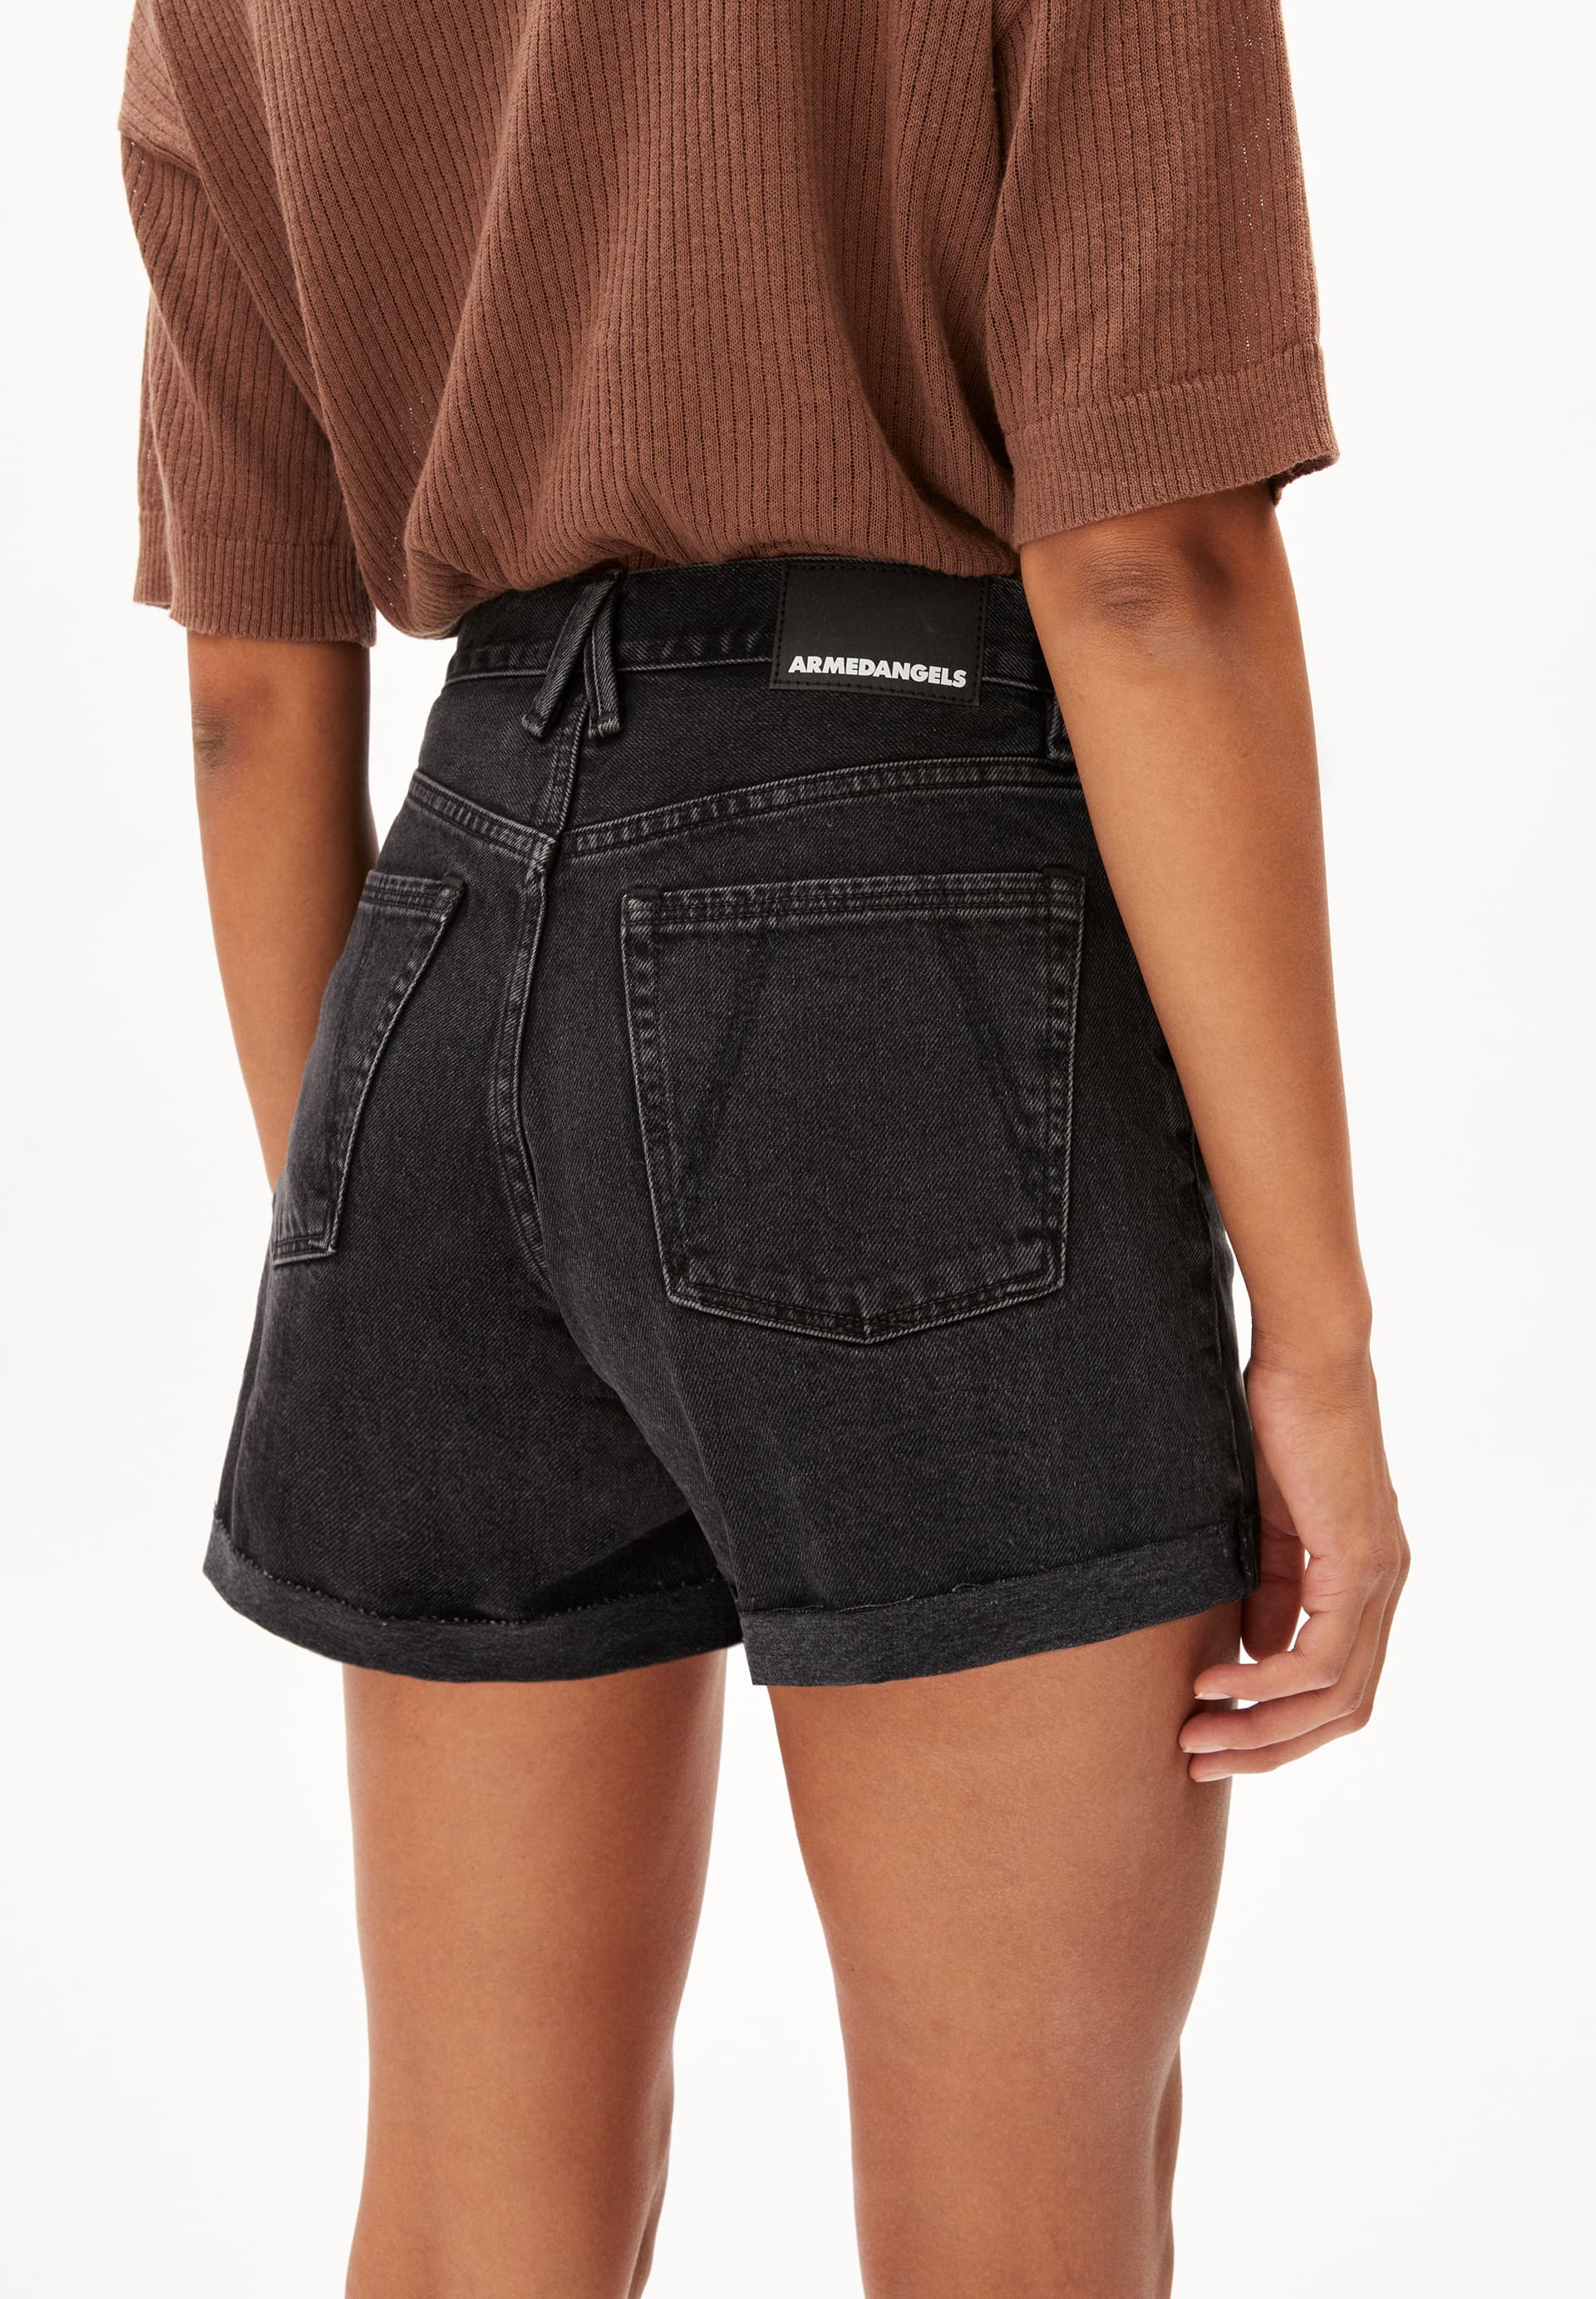 LEMEAA TURN Denim Shorts made of recycled Cotton Mix